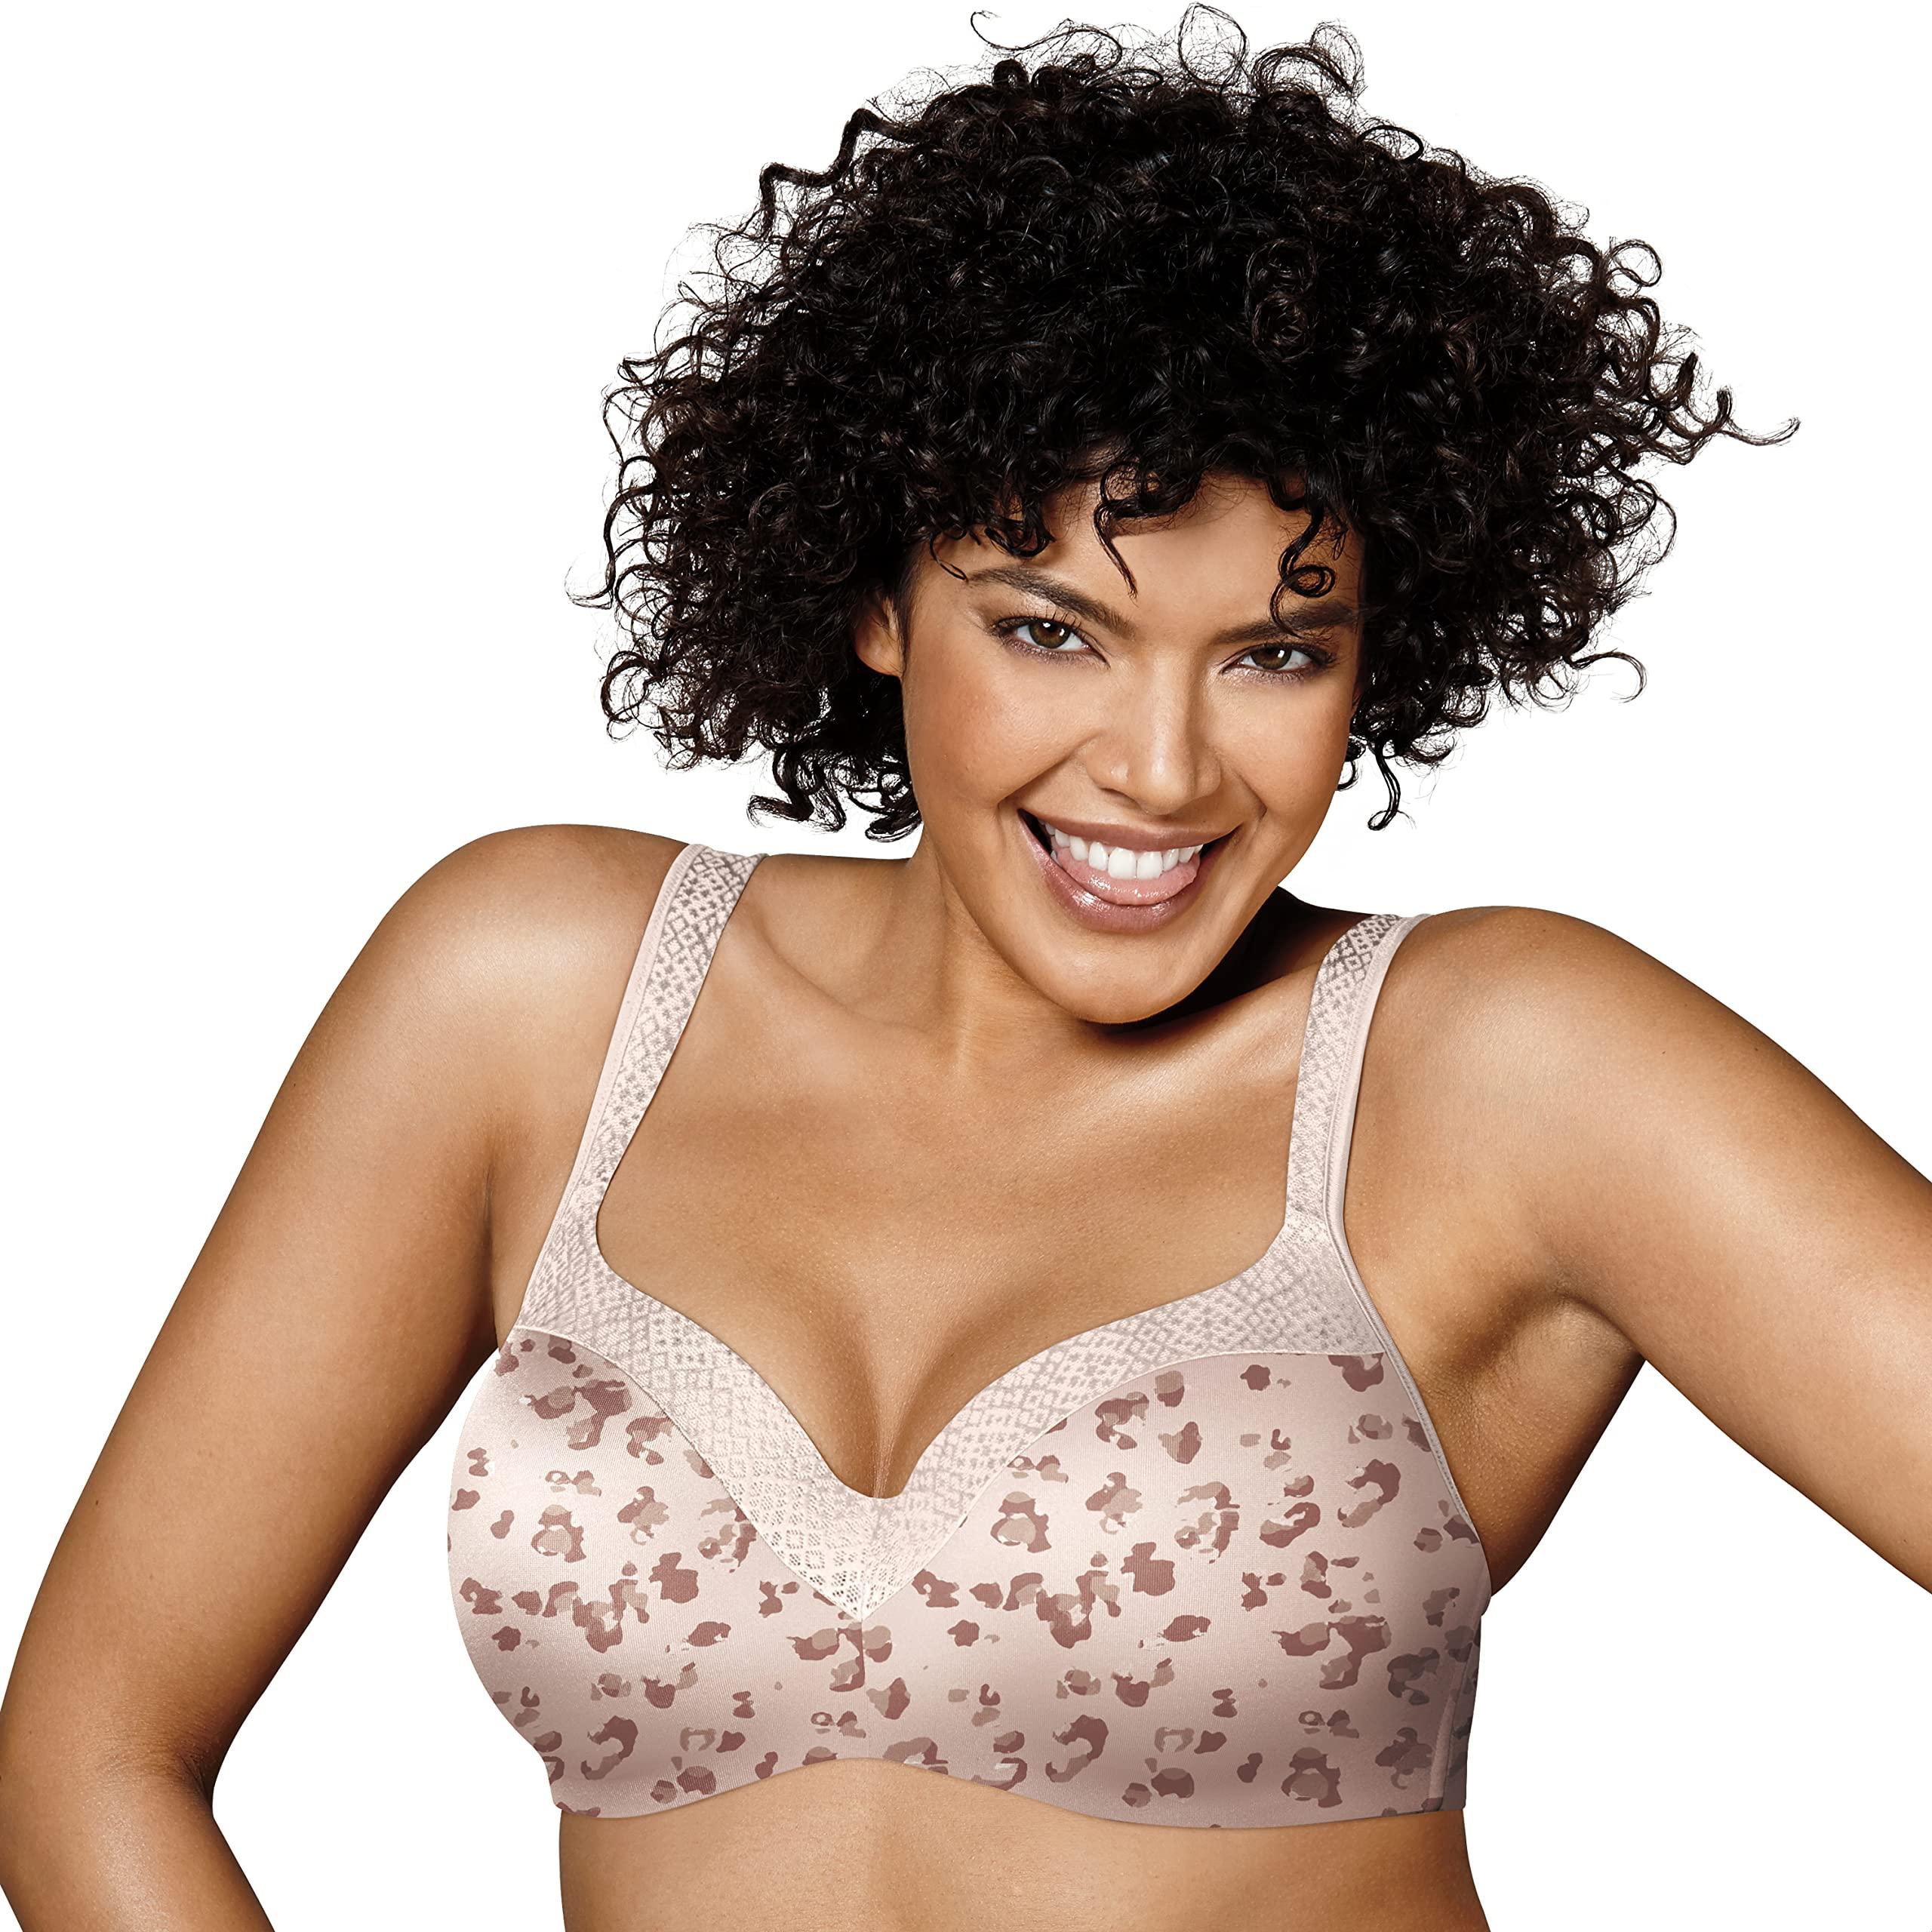 Playtex Women's Secrets Balconette T-Shirt Bra for Full Figures |  Supportive Underwire, Smooth Cups, Wide Straps